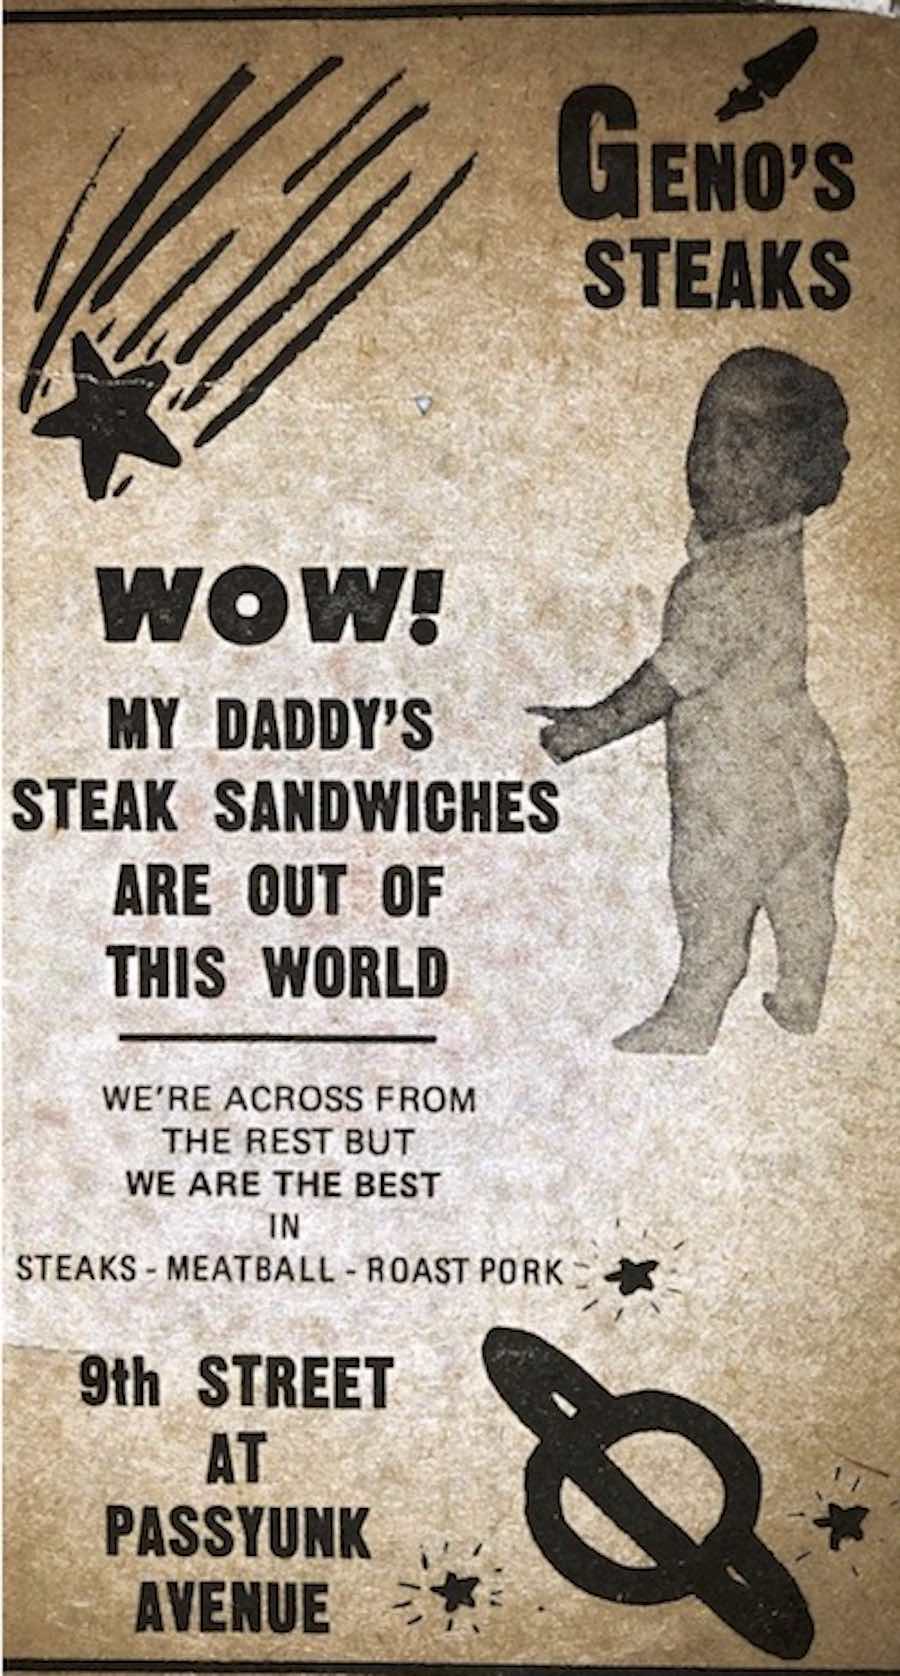 An old Geno's Steaks ad